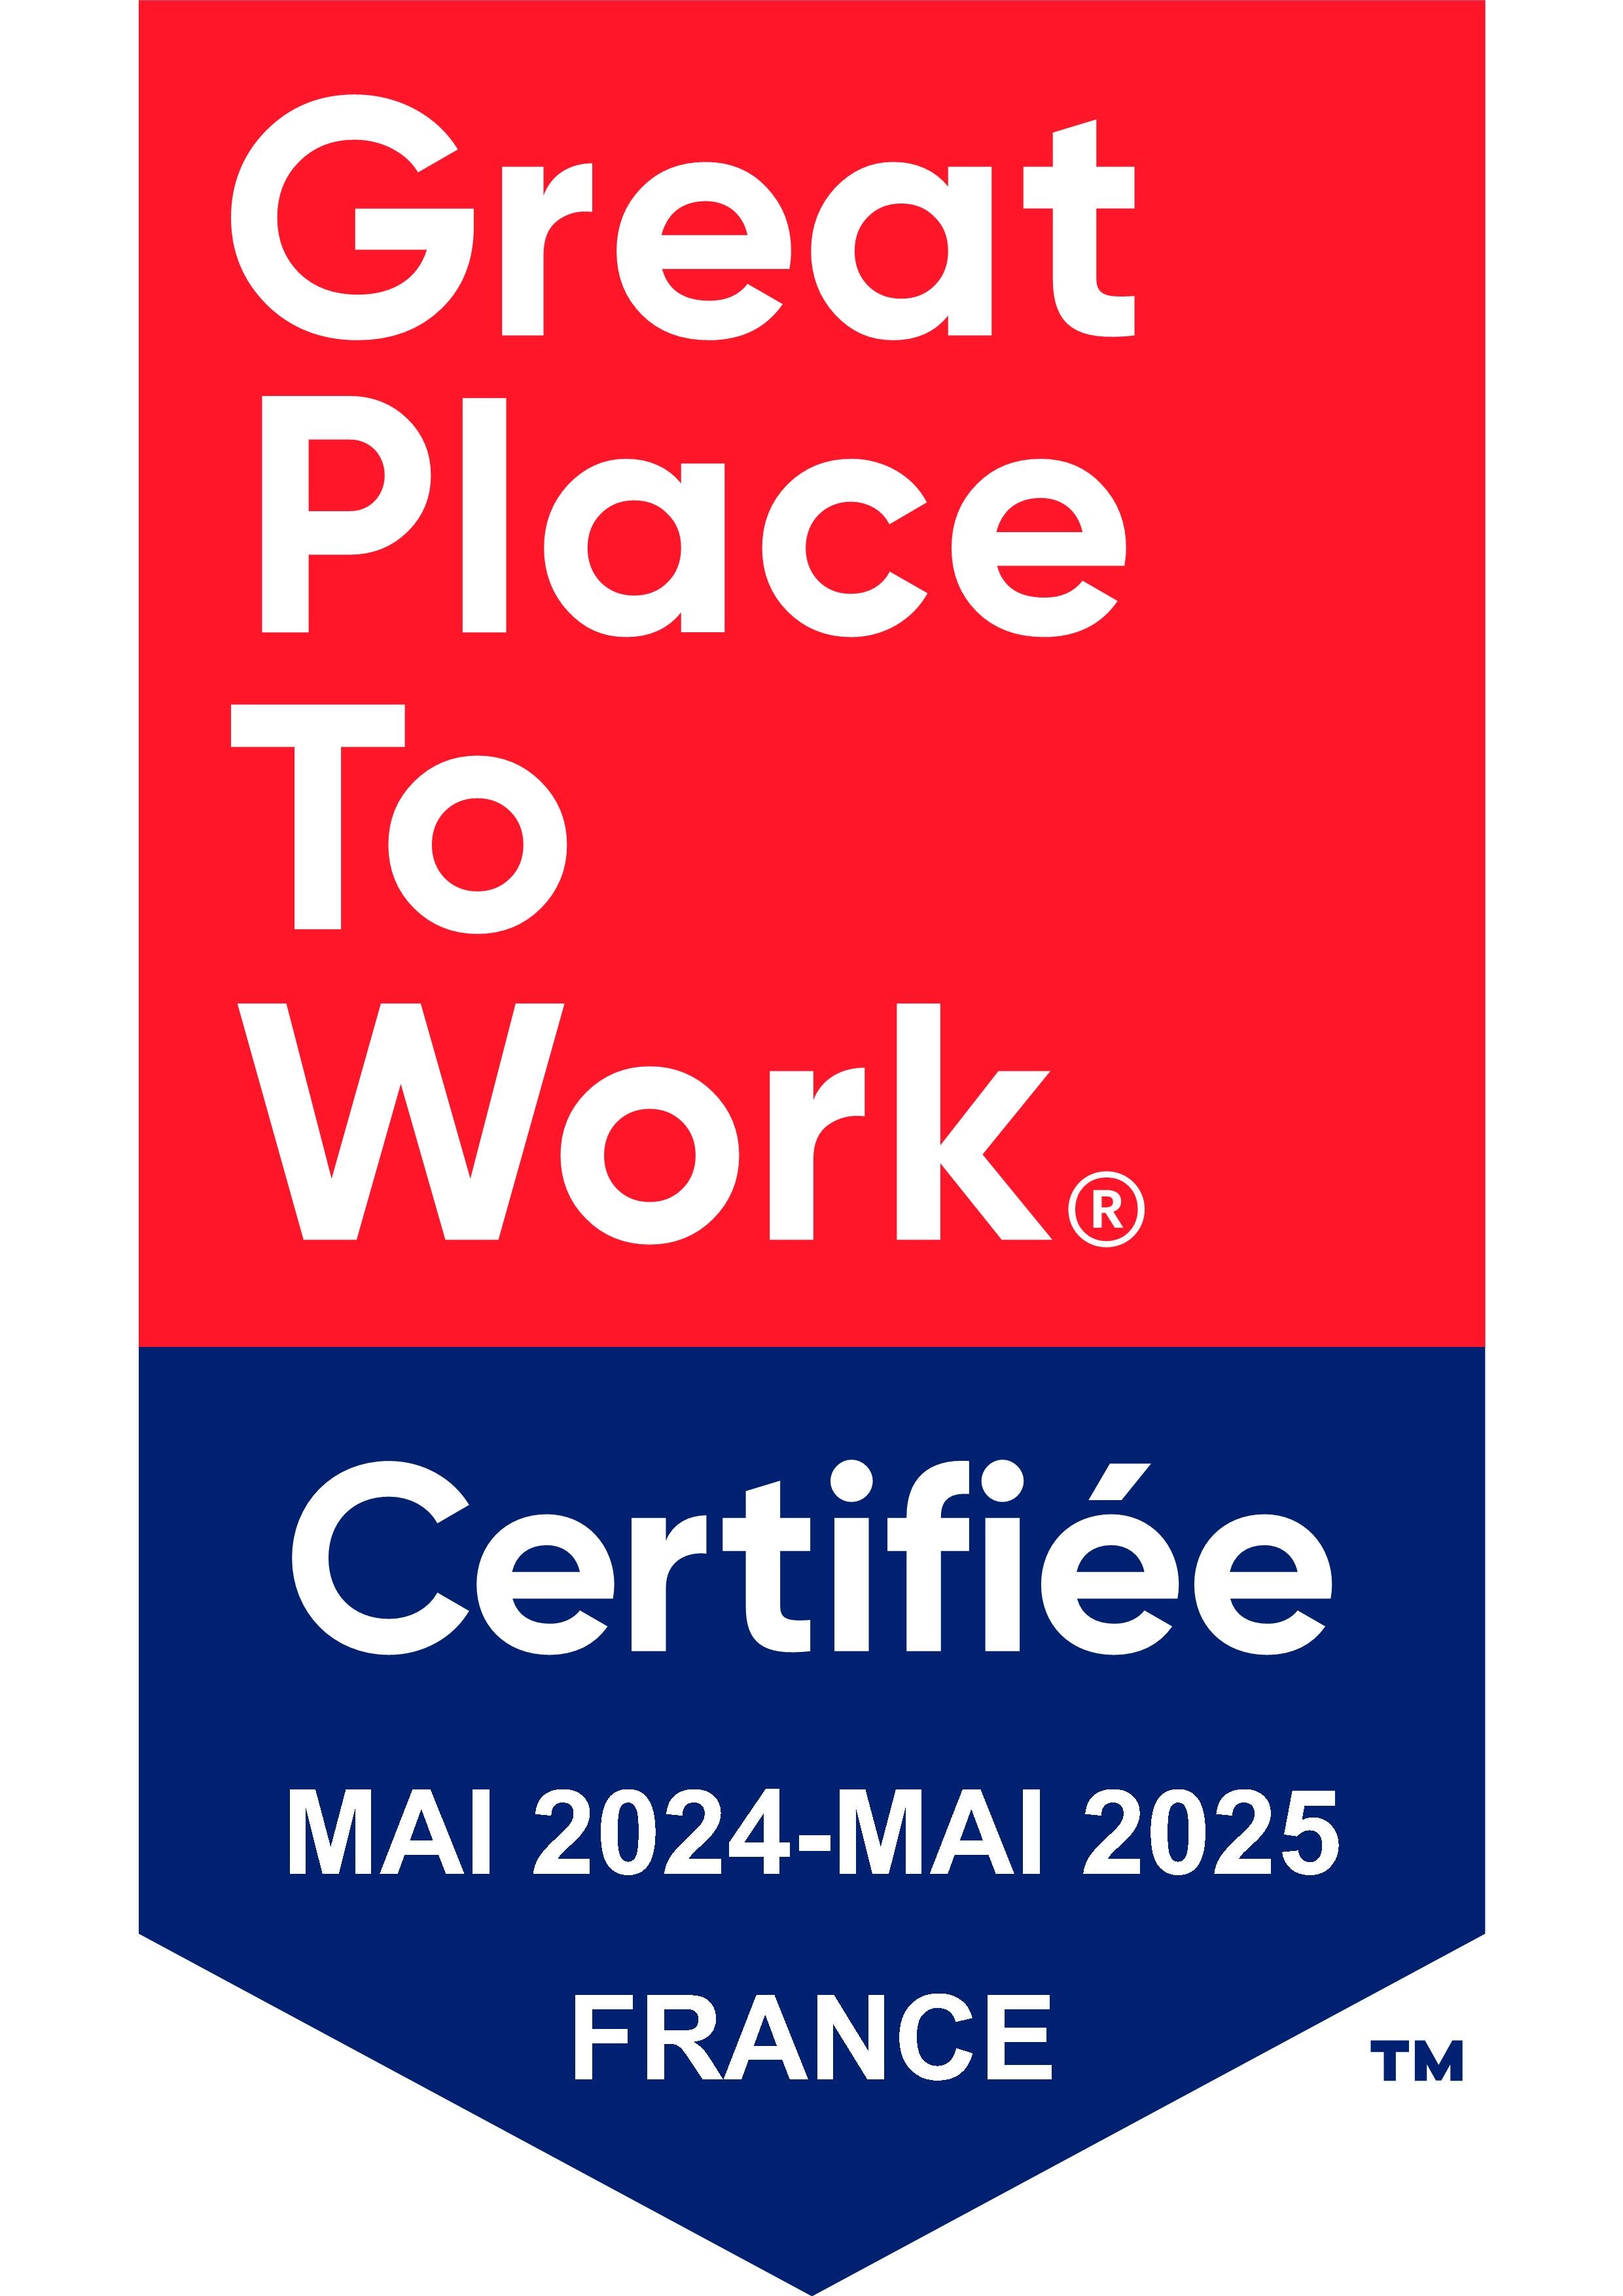 Great Place to Work - France - 2024 logo